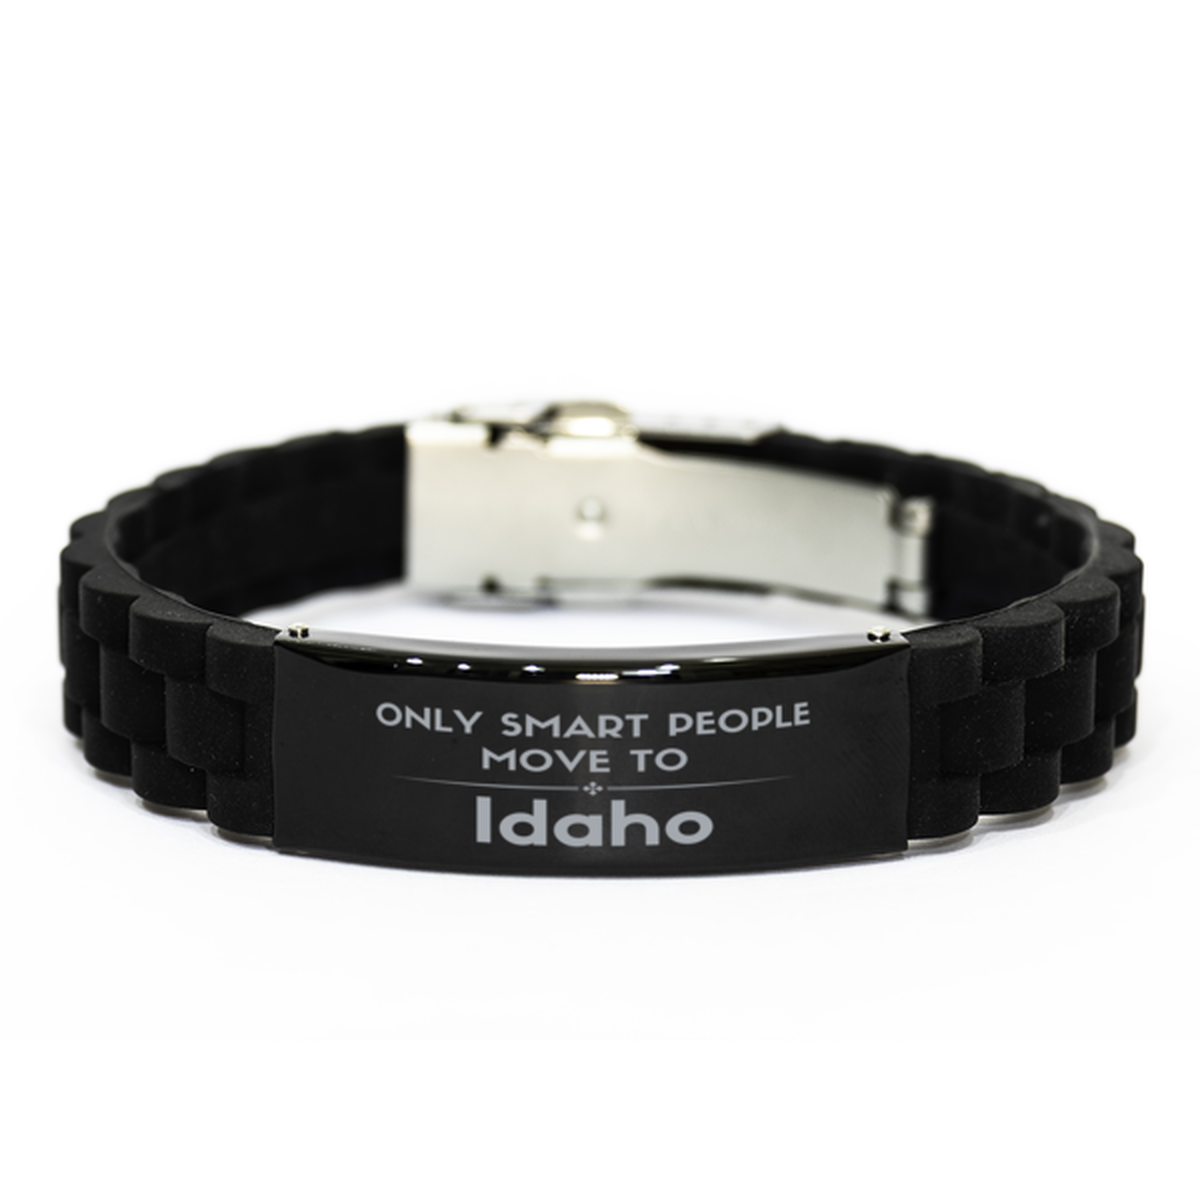 Only smart people move to Idaho Black Glidelock Clasp Bracelet, Gag Gifts For Idaho, Move to Idaho Gifts for Friends Coworker Funny Saying Quote